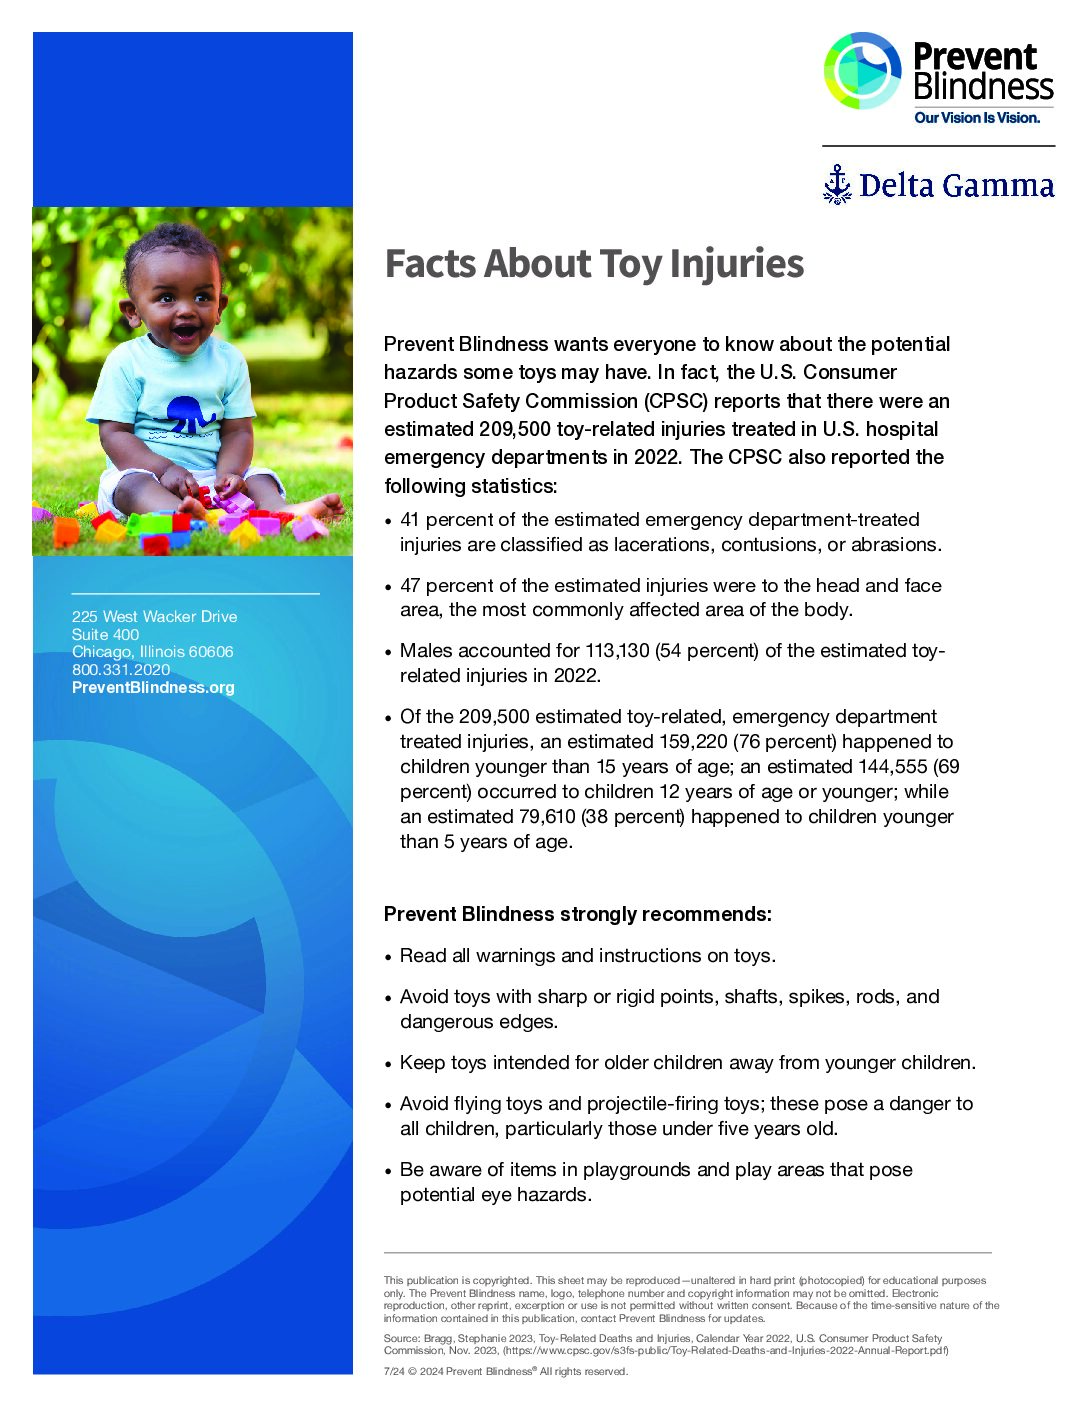 Facts About Toy Injuries